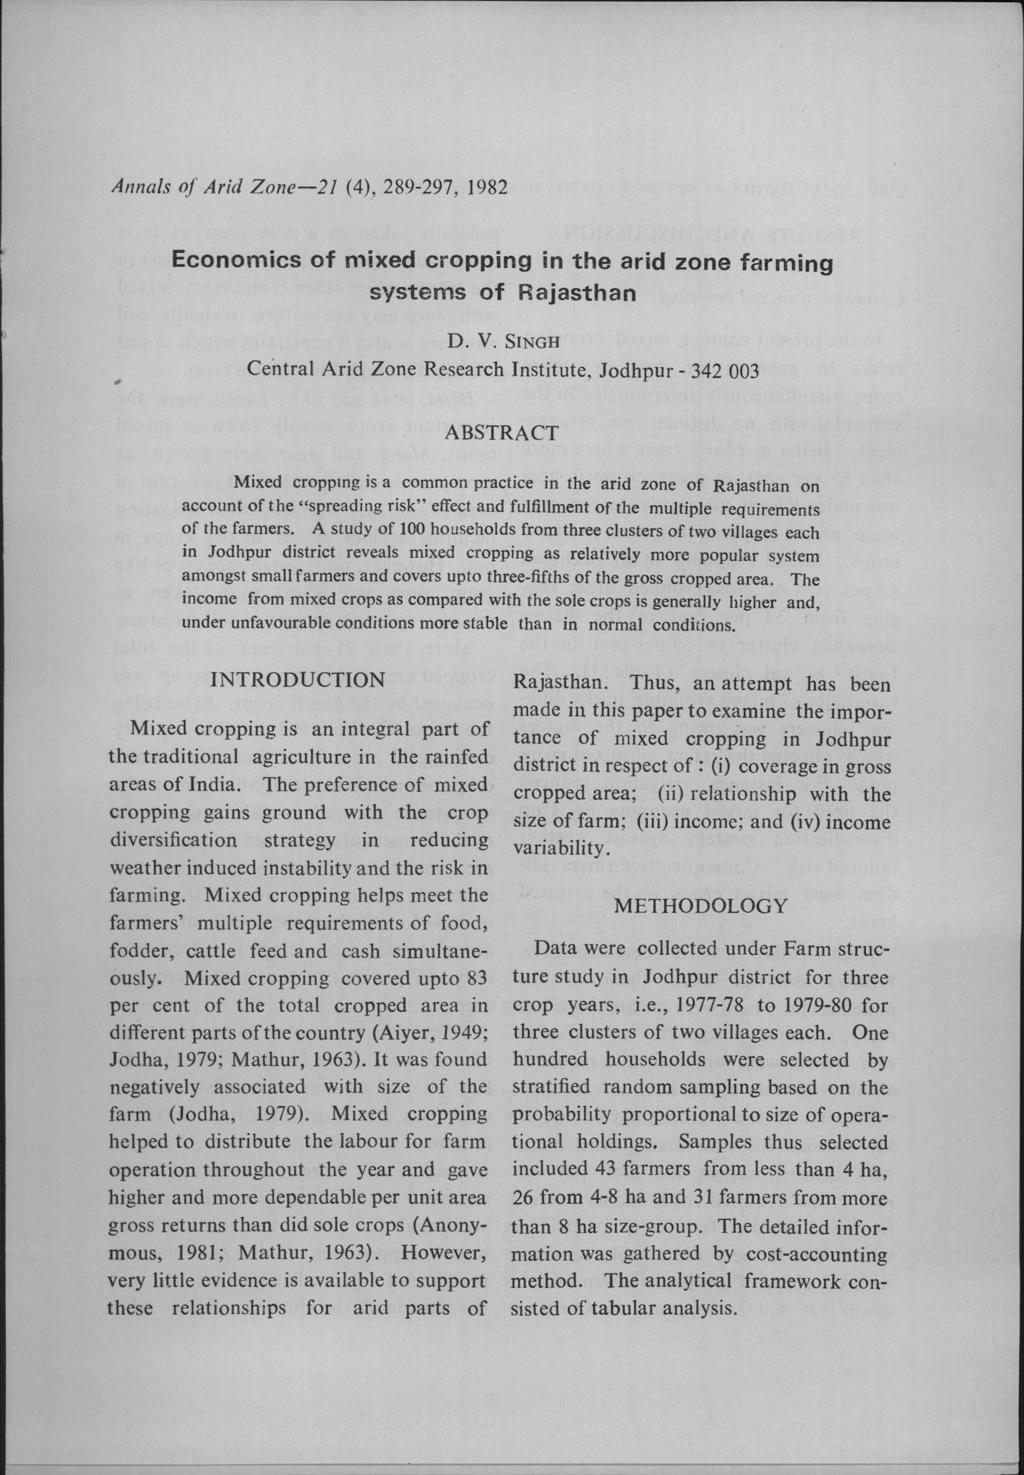 Annals of Arid Zone-21 (4),289-297, ]982 Economics of mixed cropping systems of Rajasthan in the arid zone farming D. V.